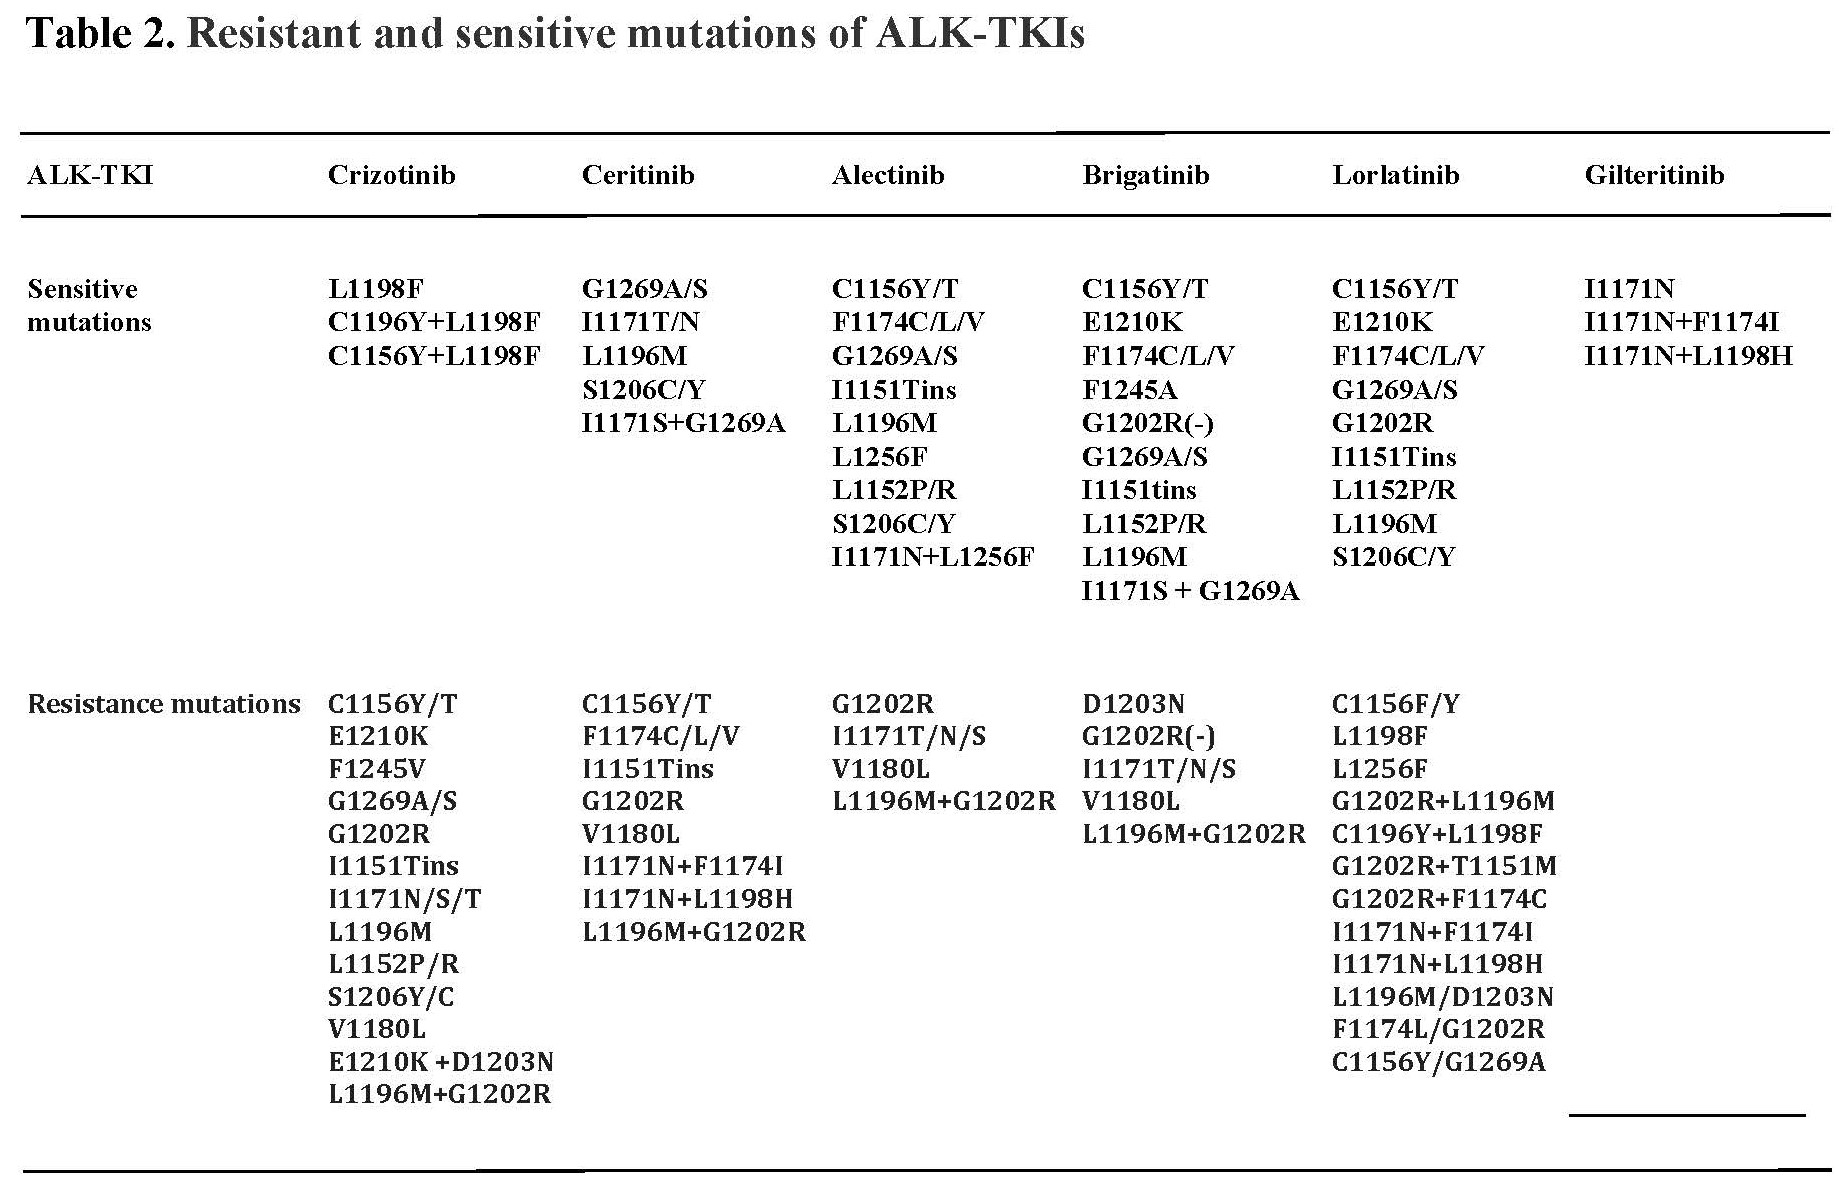 Resistant and sensitive mutations of ALK-TKIs